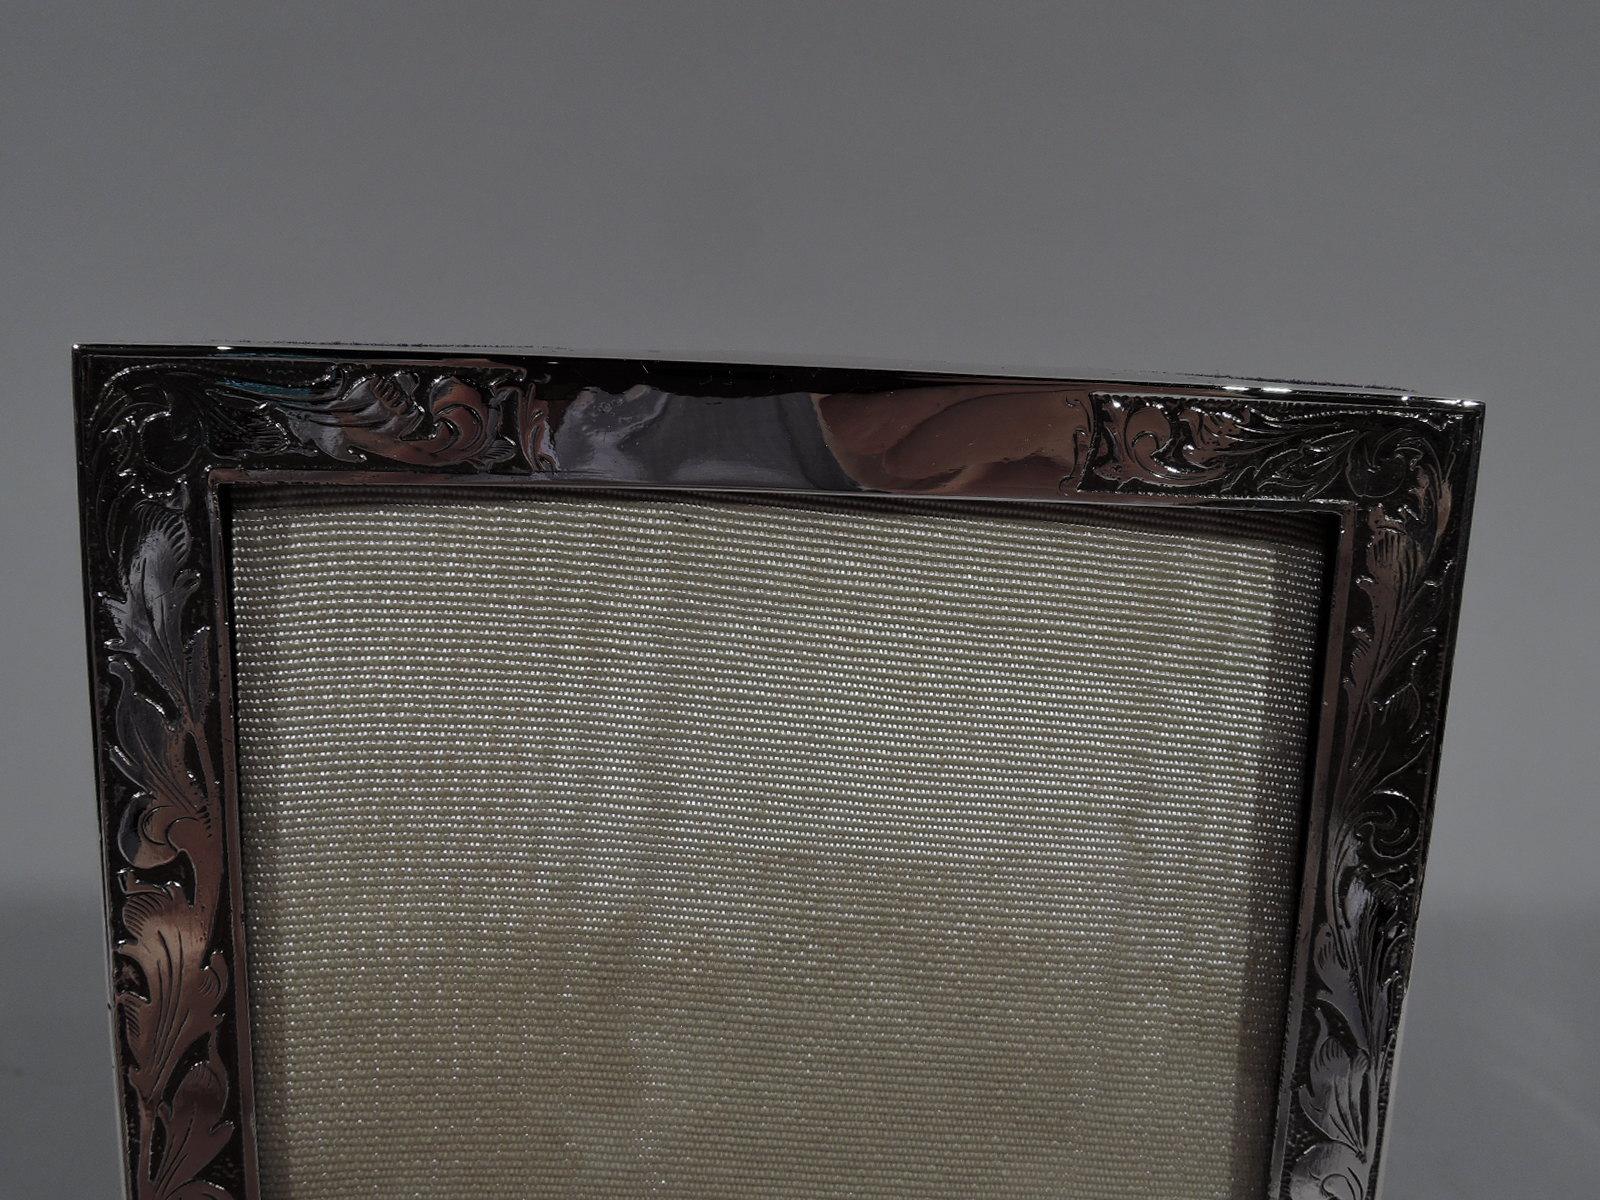 Pretty turn-of-the-century American Art Nouveau sterling silver picture frame. Rectangular window in flat surround with acid-etched scrolling leaves. Top center vacant. With glass, silk lining, and velvet back and hinged support. For portrait